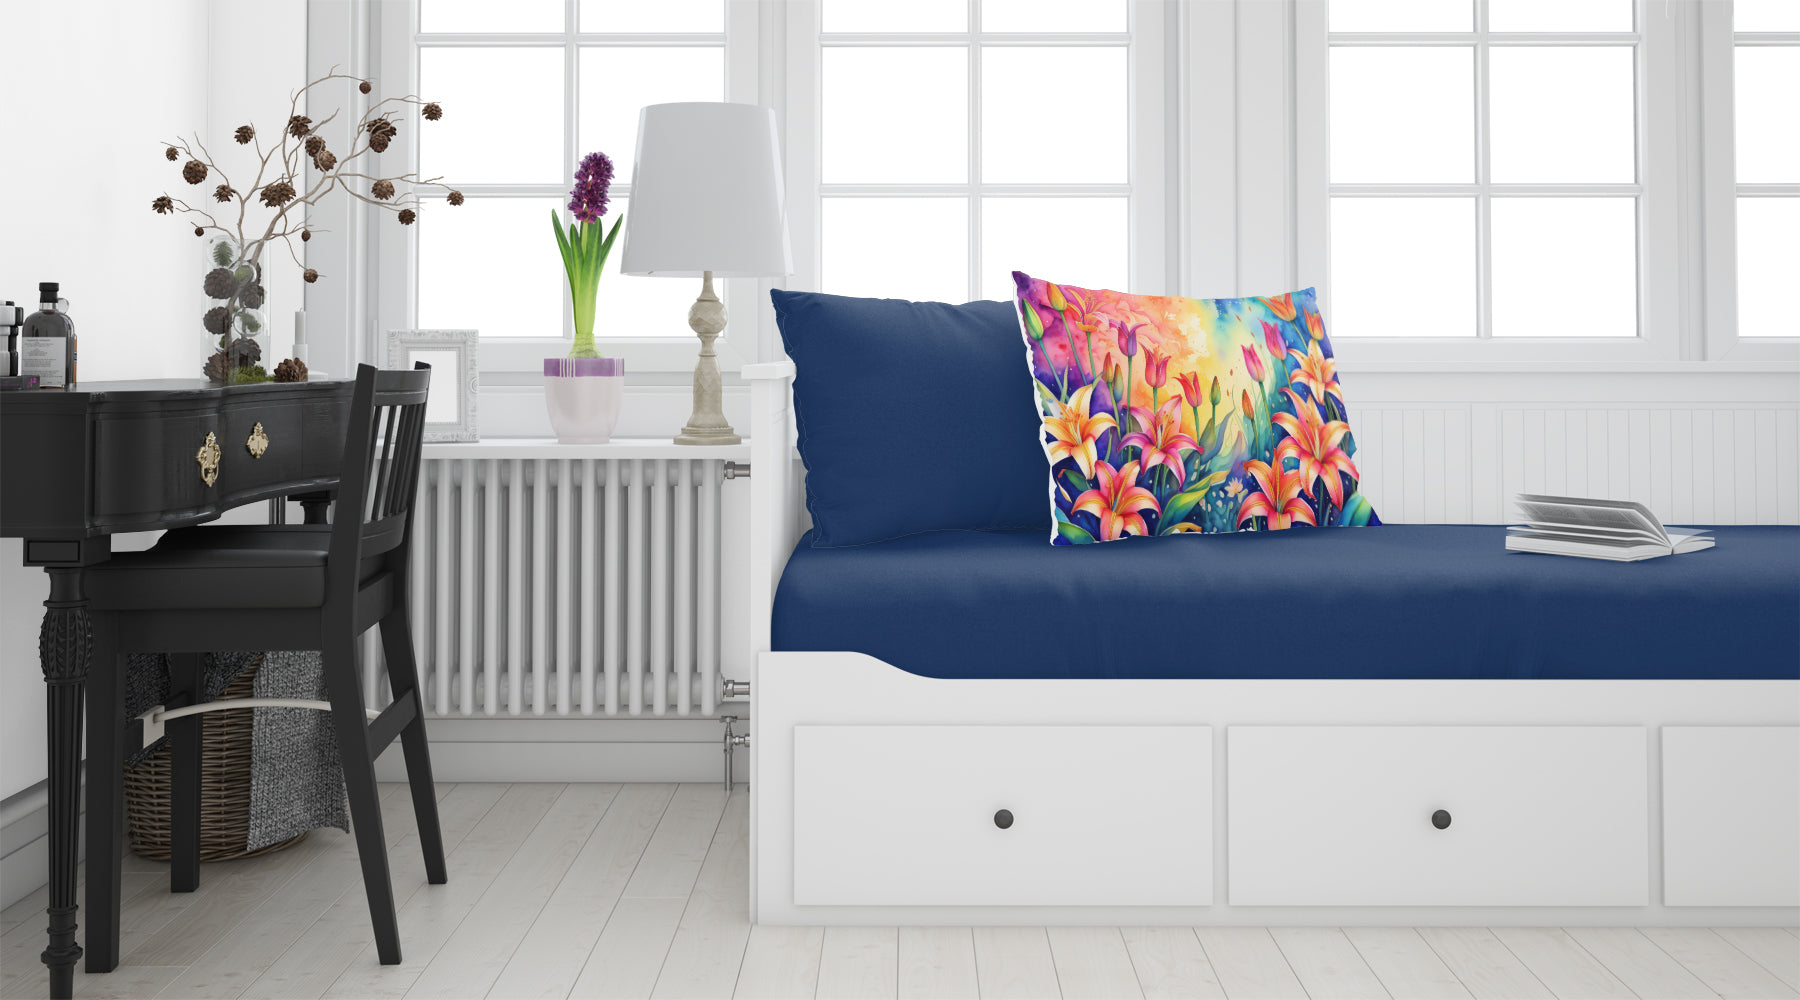 Buy this Lilies in Color Fabric Standard Pillowcase